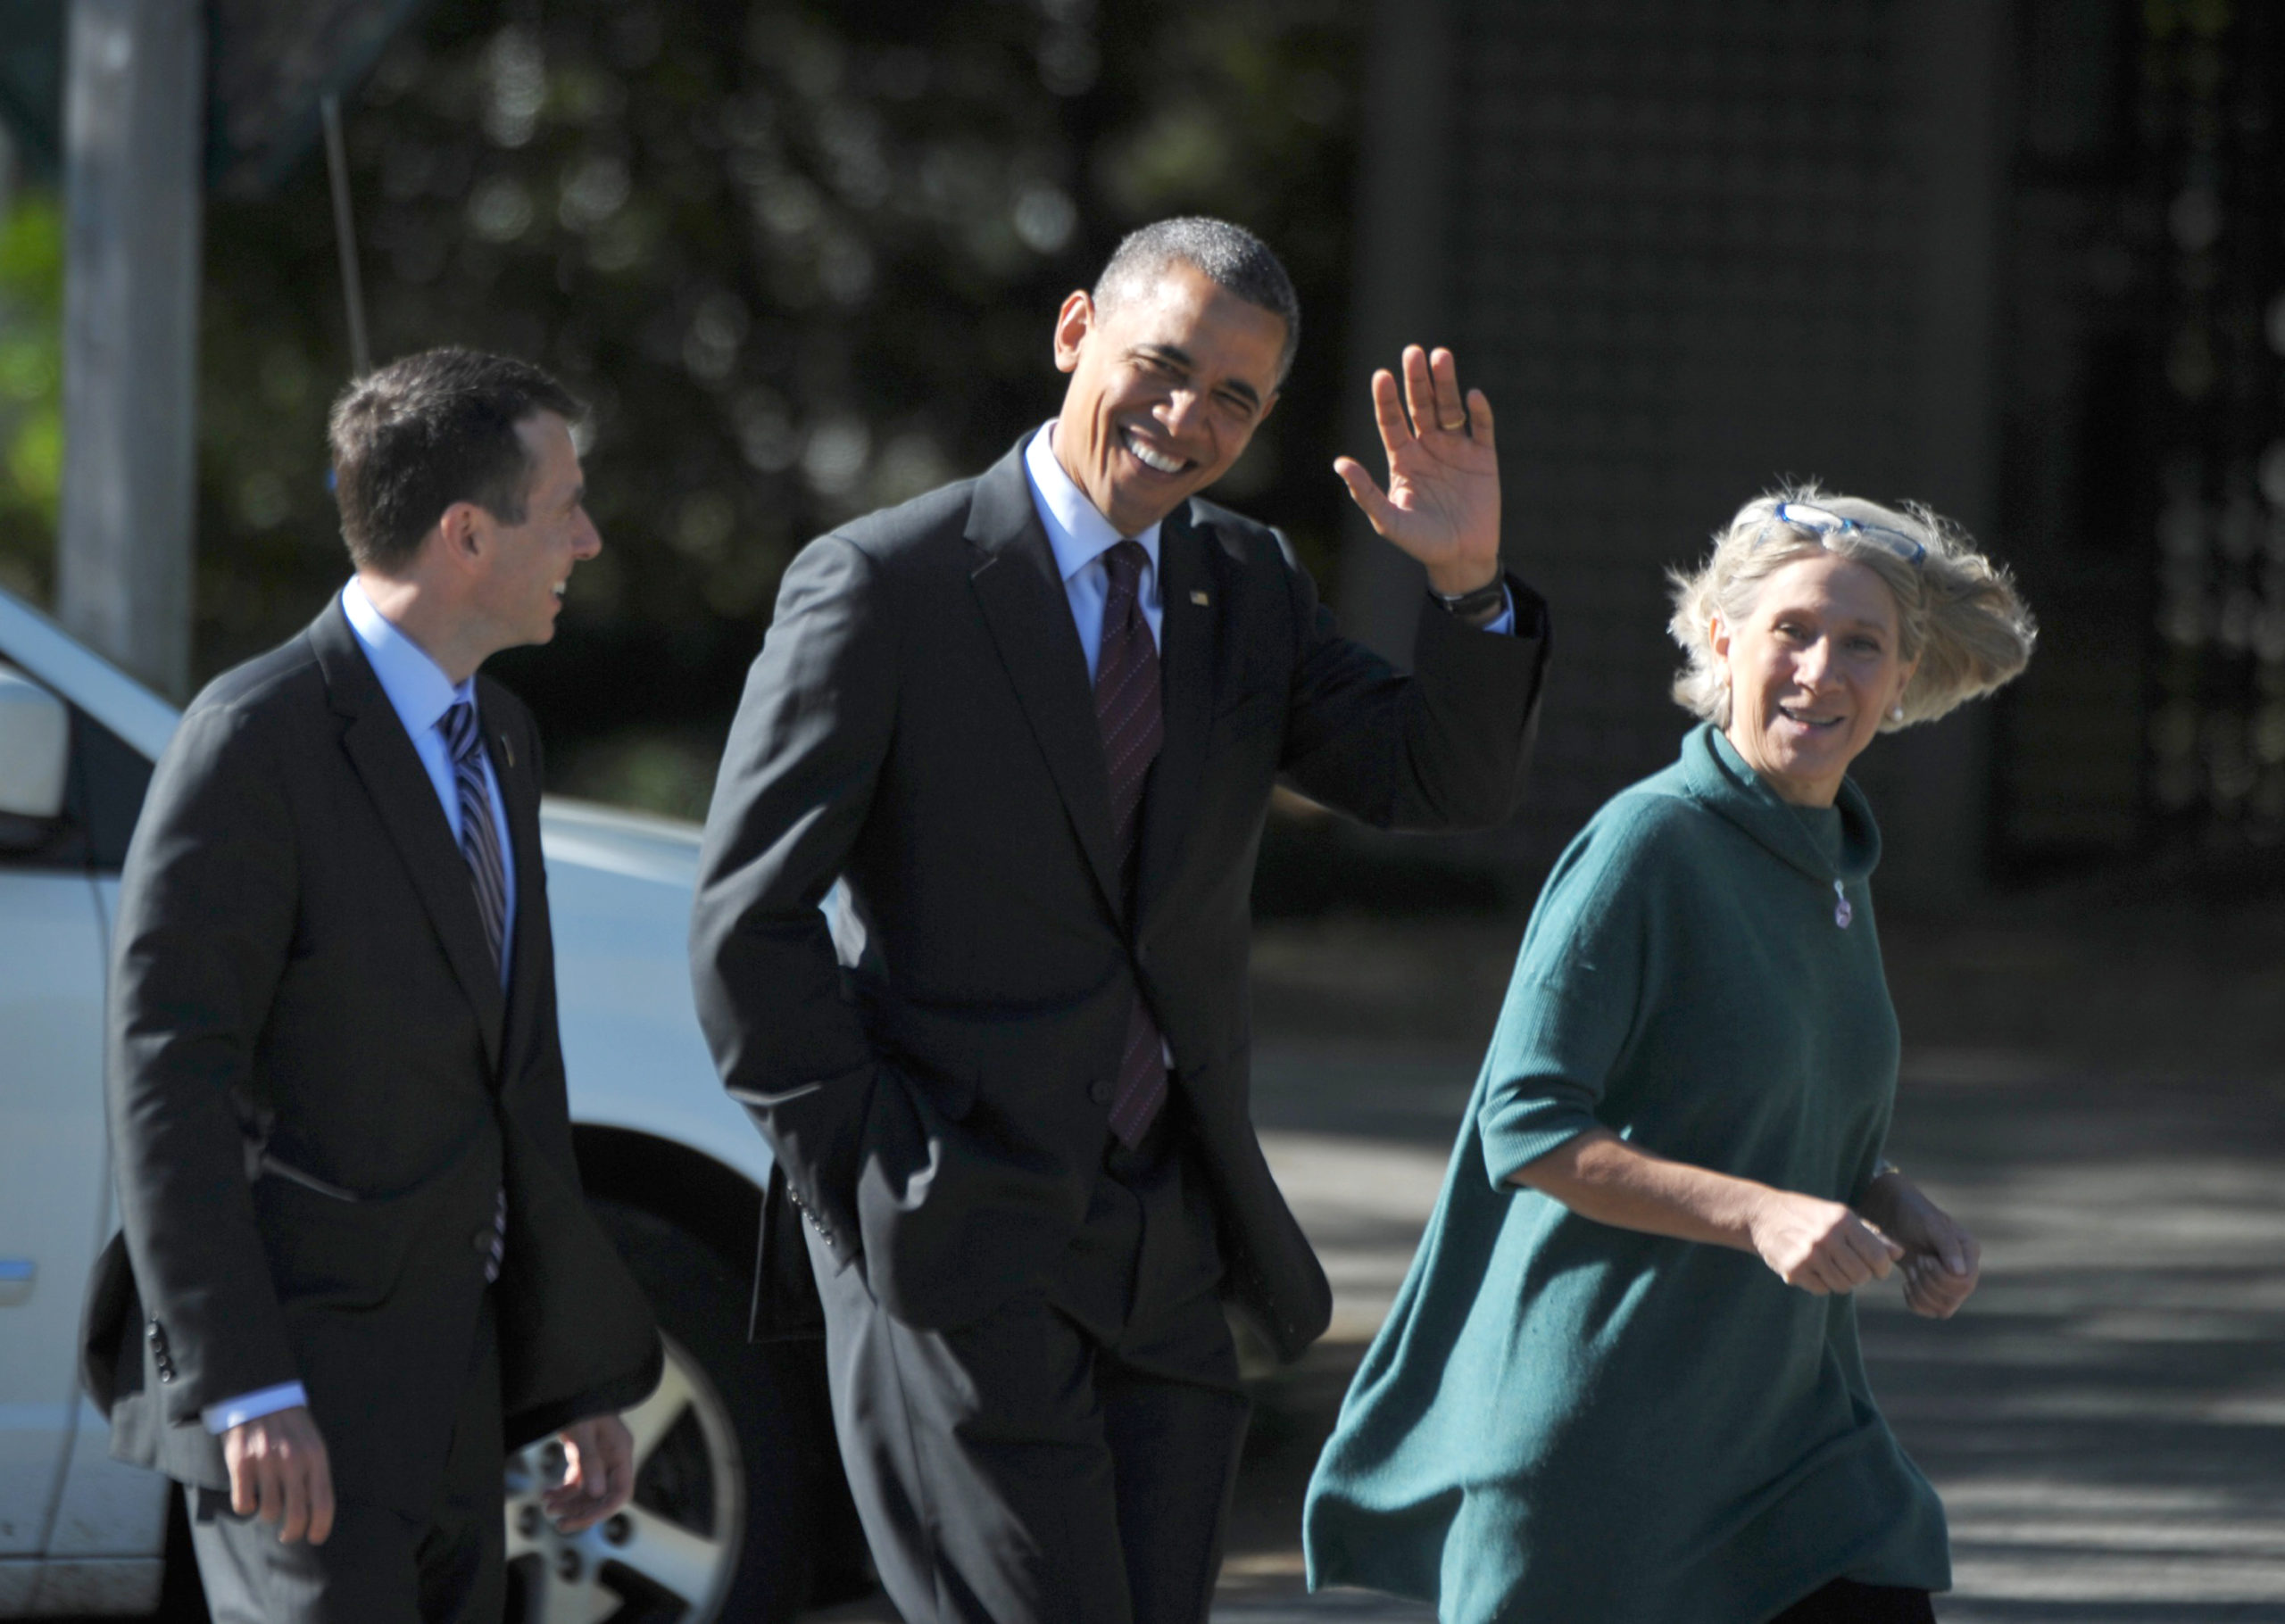 US President Barack Obama walks with Senior White House Advisor David Plouffe (L) and Anita Dunn to debate preparation at the Kingsmill Resort October16, 2012 in Williamsburg, Virginia. Obama will be heading to to Hofstra University in Hempstead, New York later in the day for the second presidential debate. AFP PHOTO/Mandel NGAN (Photo credit should read MANDEL NGAN/AFP via Getty Images)